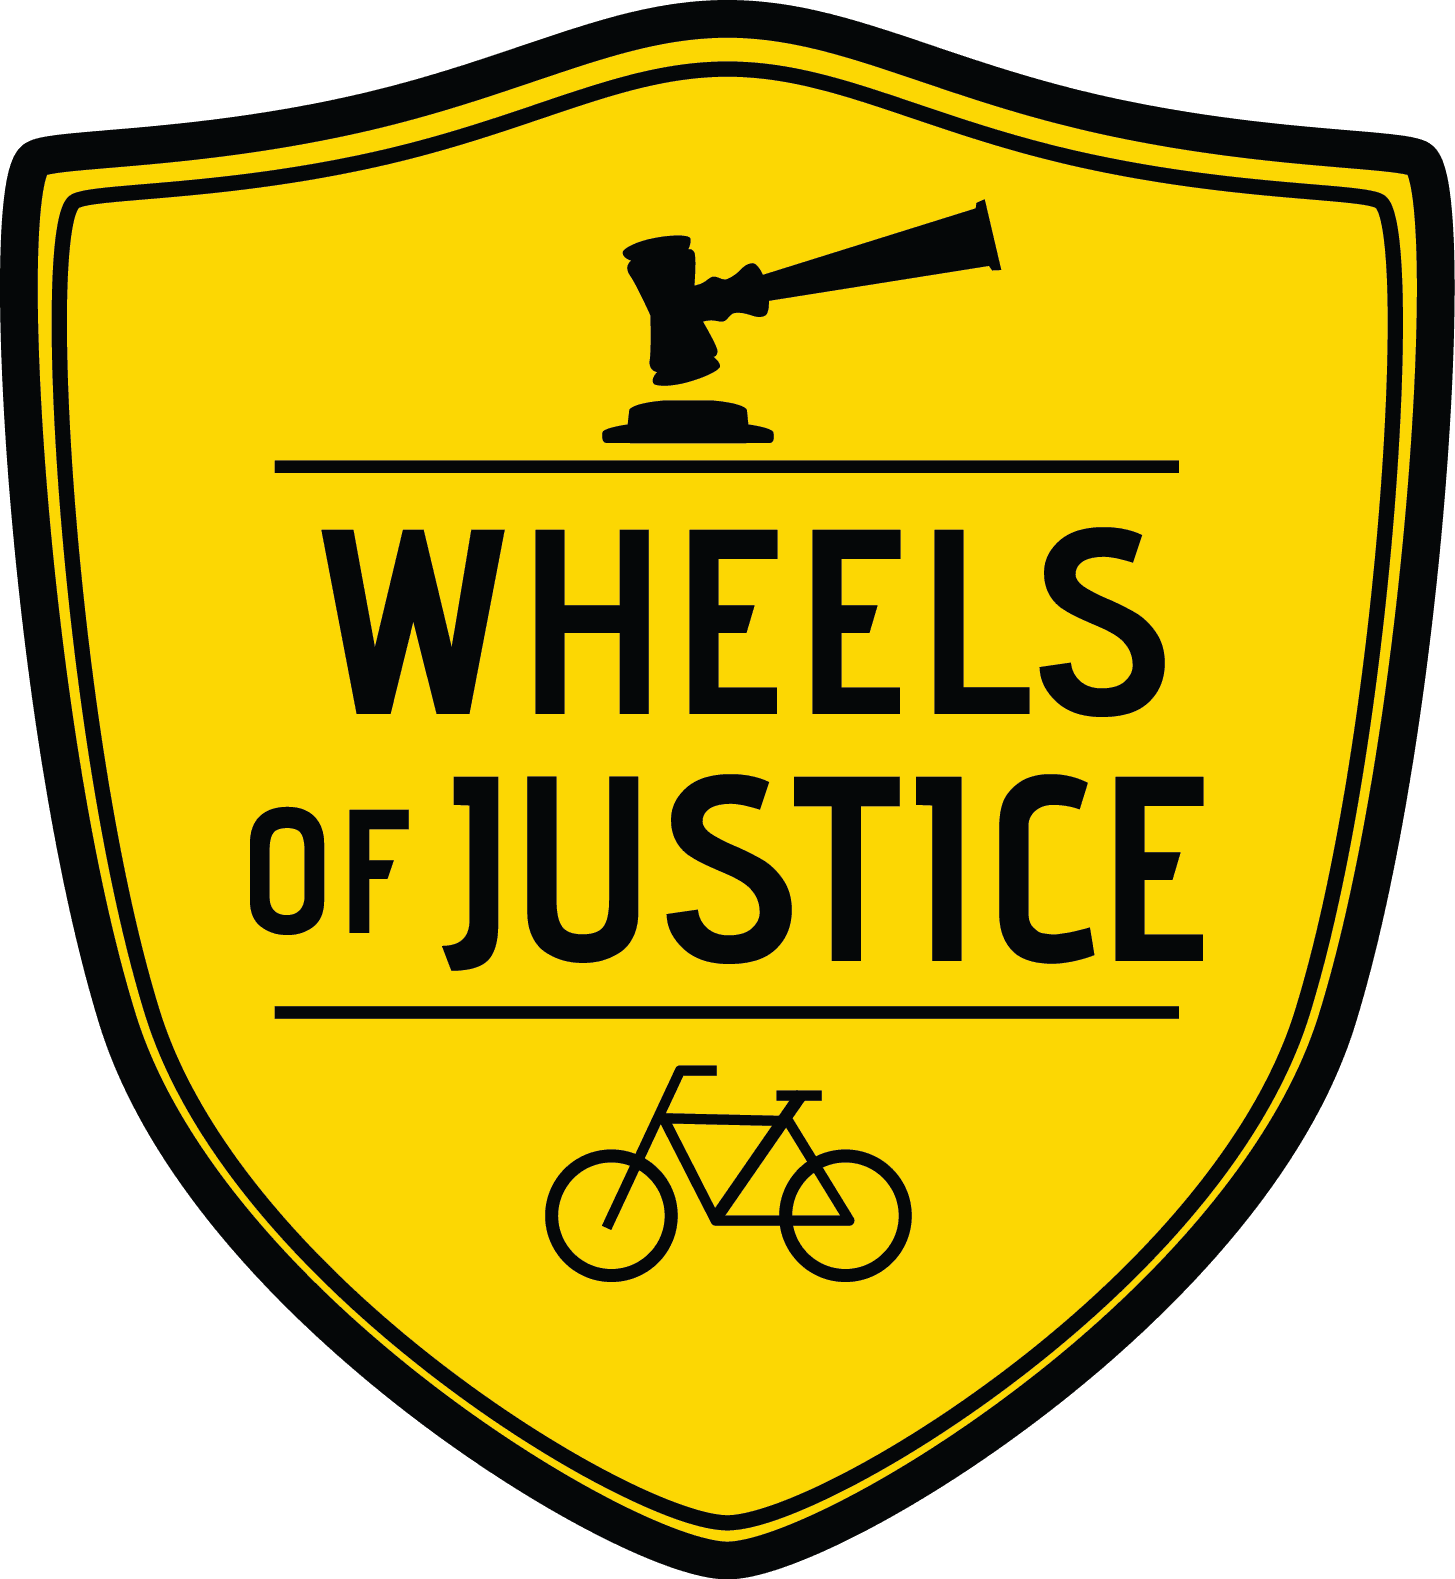 April #39 s quot Wheels of Justice quot Blog Vulnerable Road User laws in NY